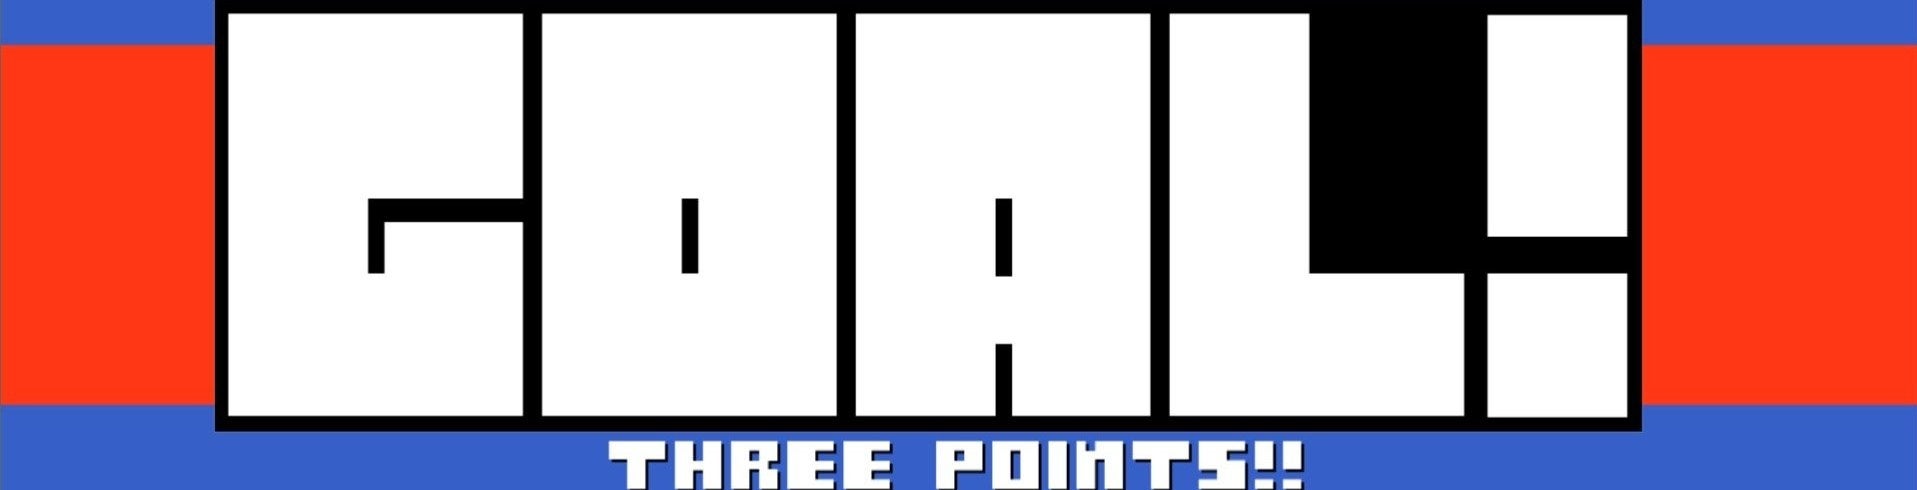 Image for #IDARB review